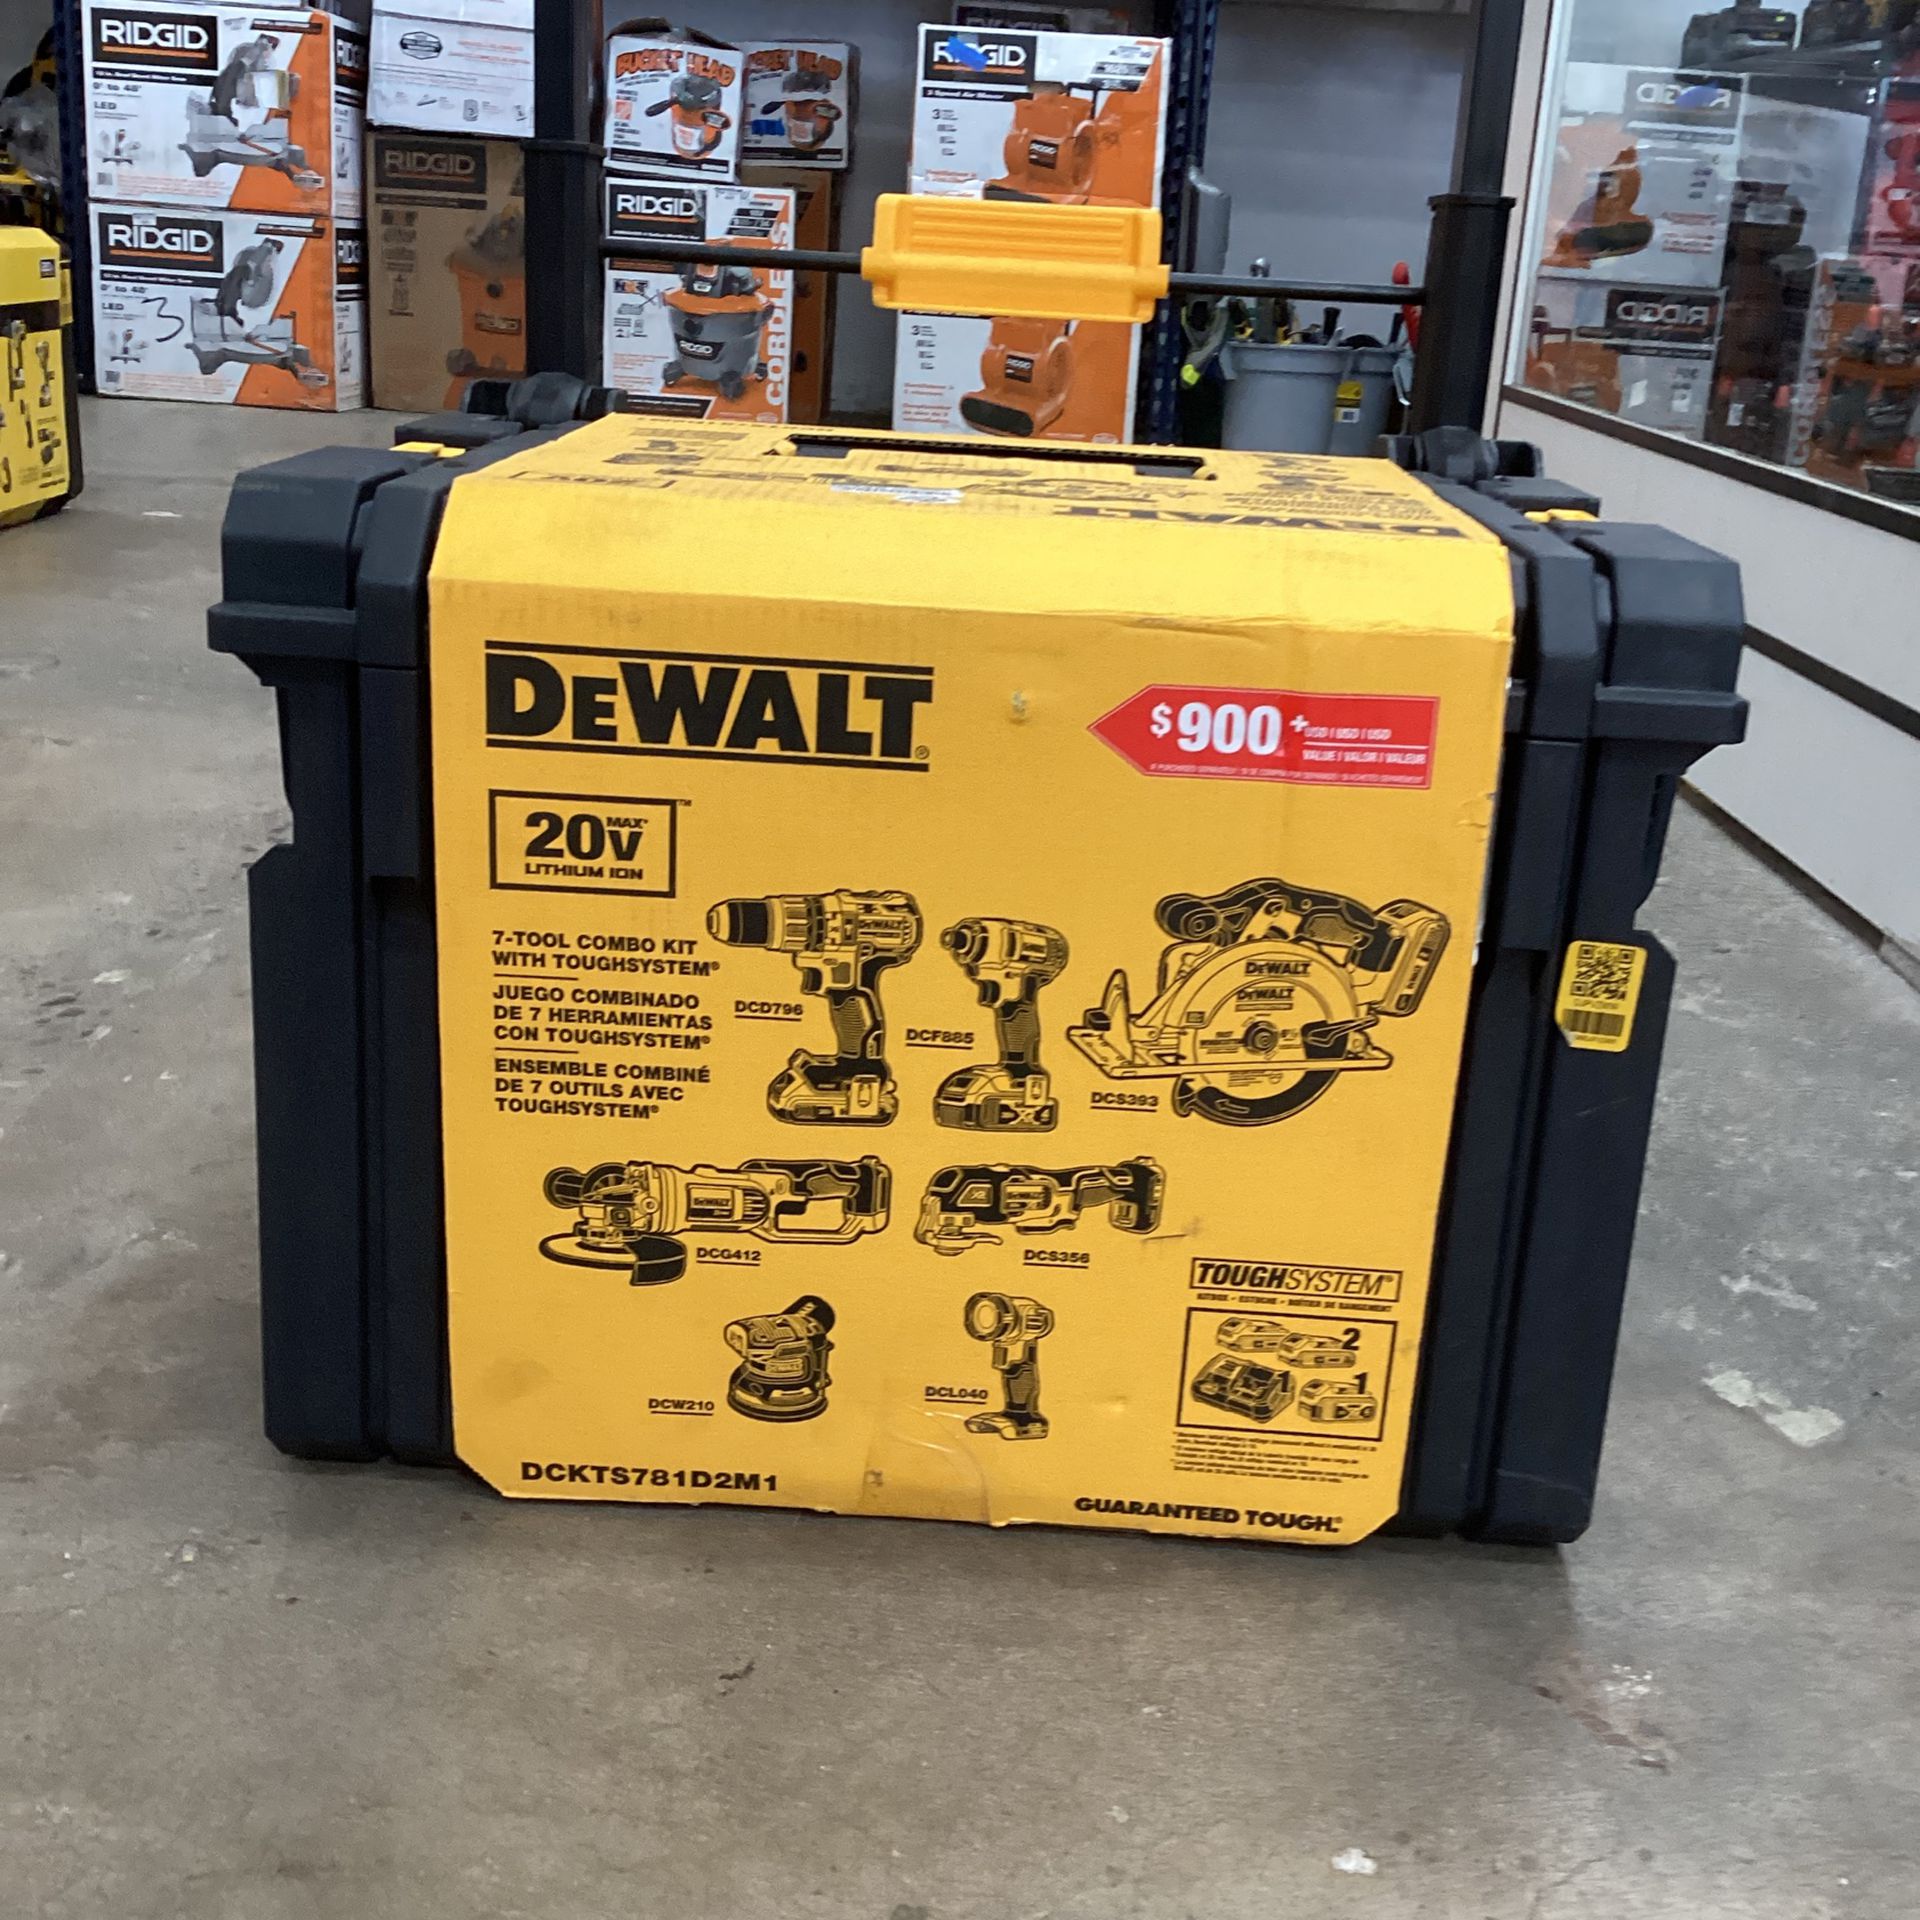 DEWALT 20V MAX Cordless Tool Combo Kit with TOUGHSYSTEM Case, (1) 20V  4.0Ah Battery and (2) 20V 2.0Ah Batteries for Sale in Phoenix, AZ OfferUp